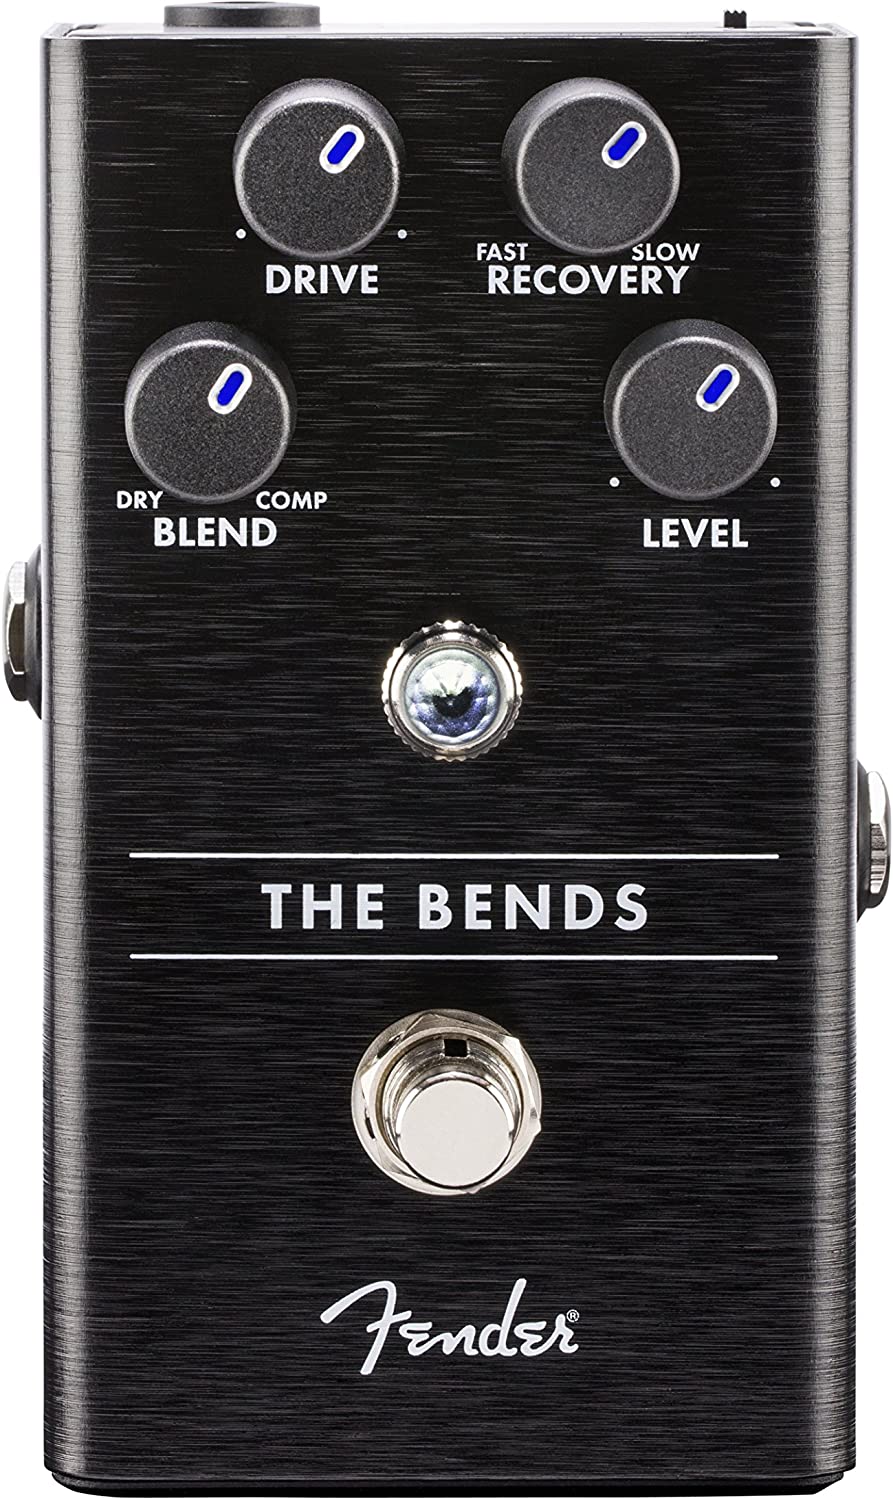 Fender The Bends Compressor Pedal on a white background